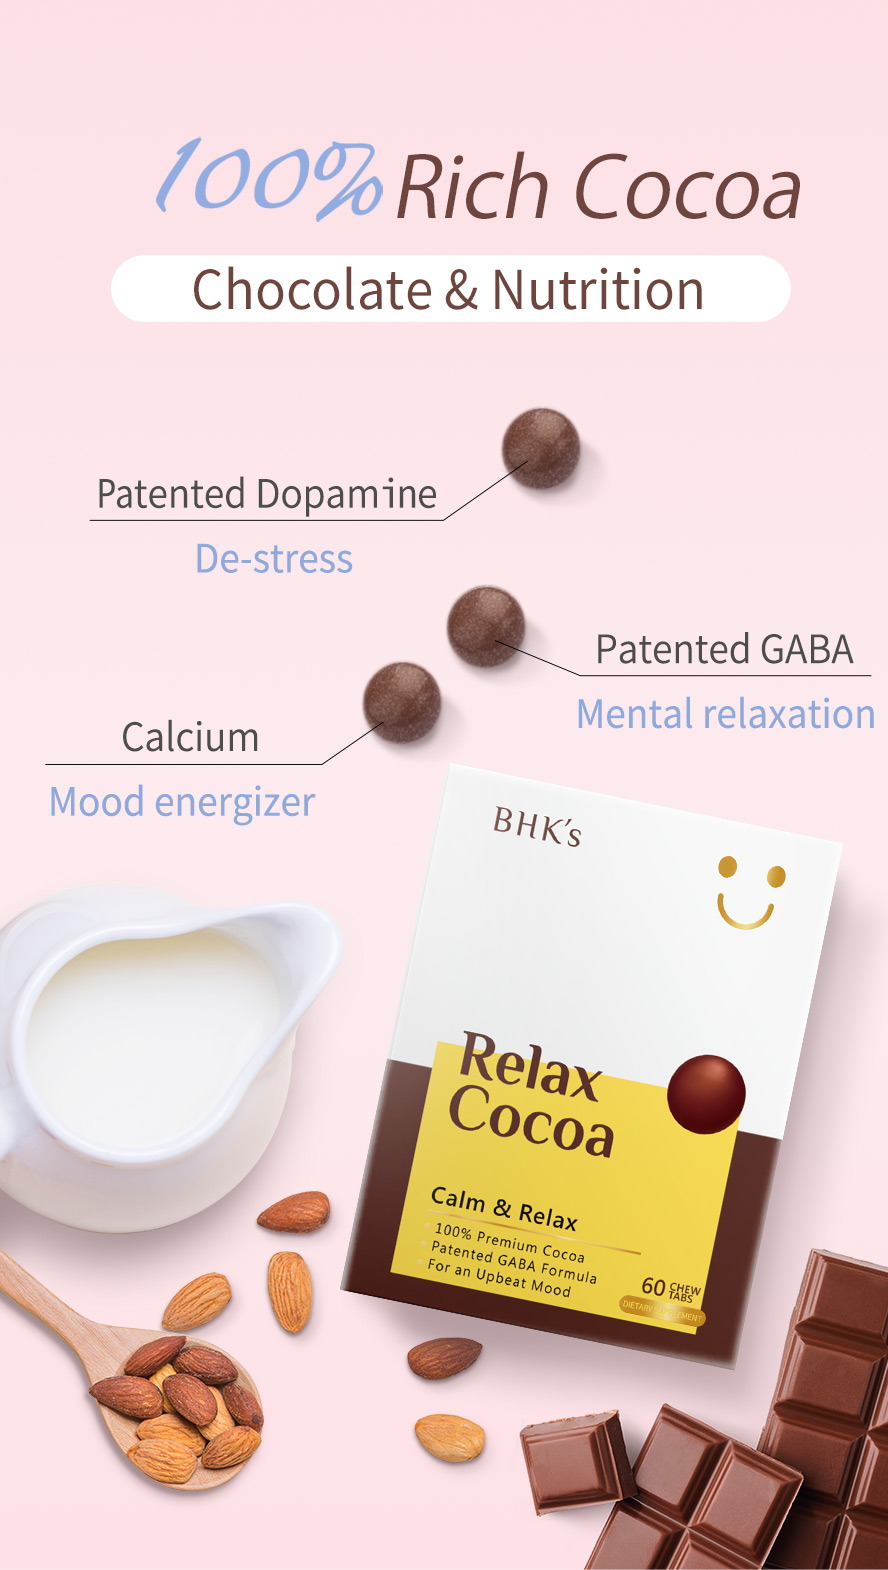 BHK's Relax Cocoa has 100% rich cocoa with patented dopamine, patented GABA, and calcium to energize, relieve stress, and promote relexation.